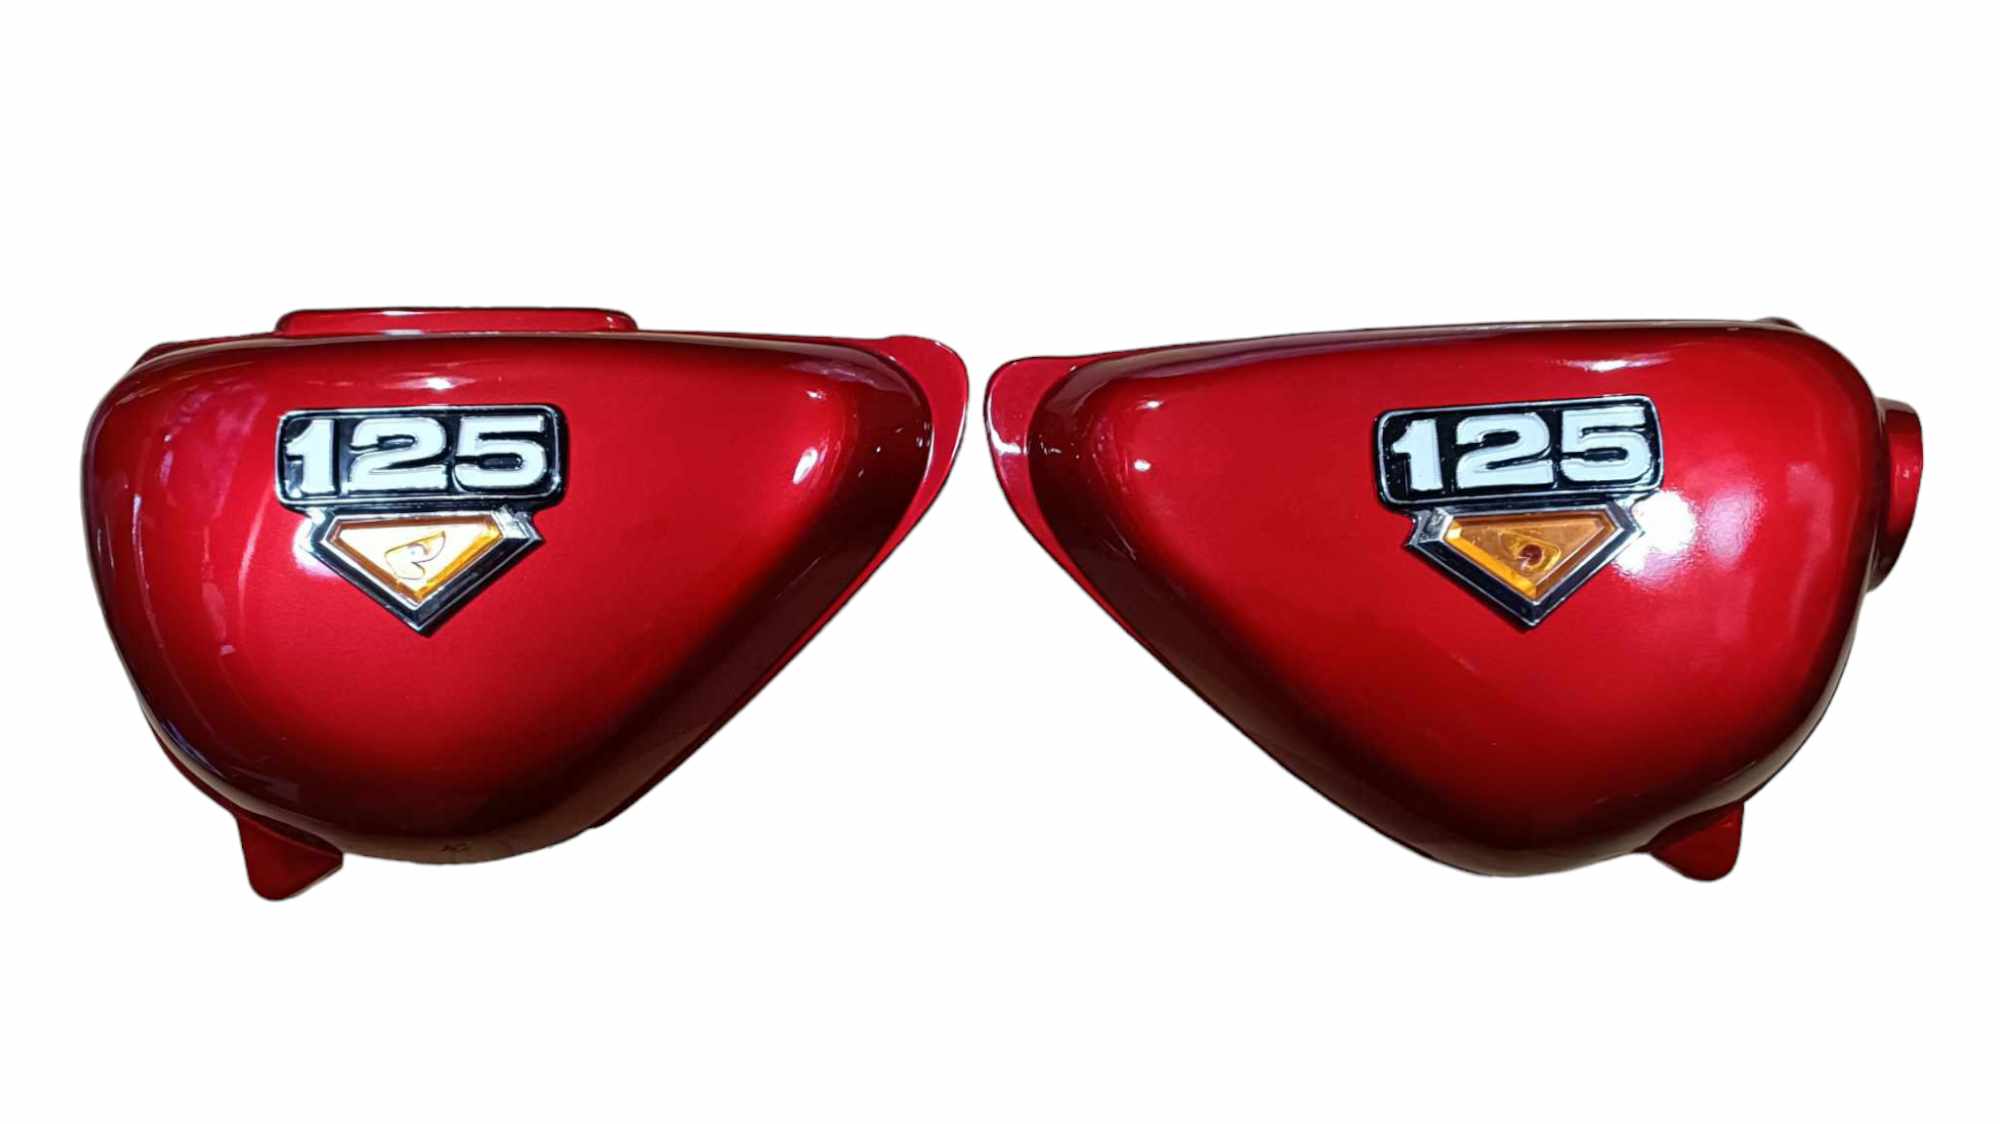 Honda CB125S CB100K3 Pair Of Motorcycle Side Panel Covers Left & Right In Red